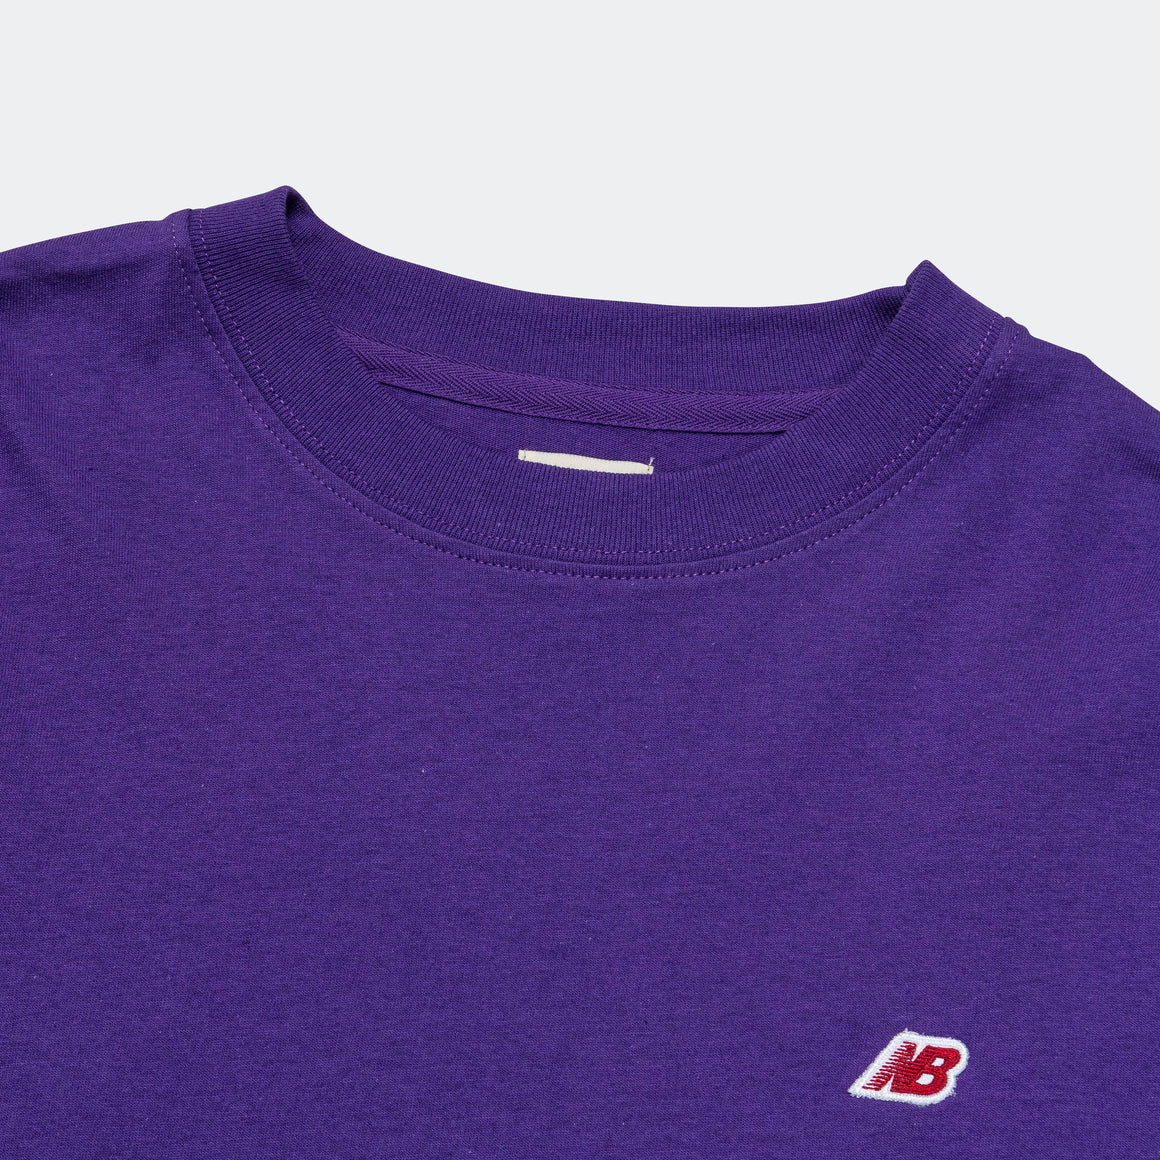 MADE in USA Long Sleeve Tee - Prism Purple